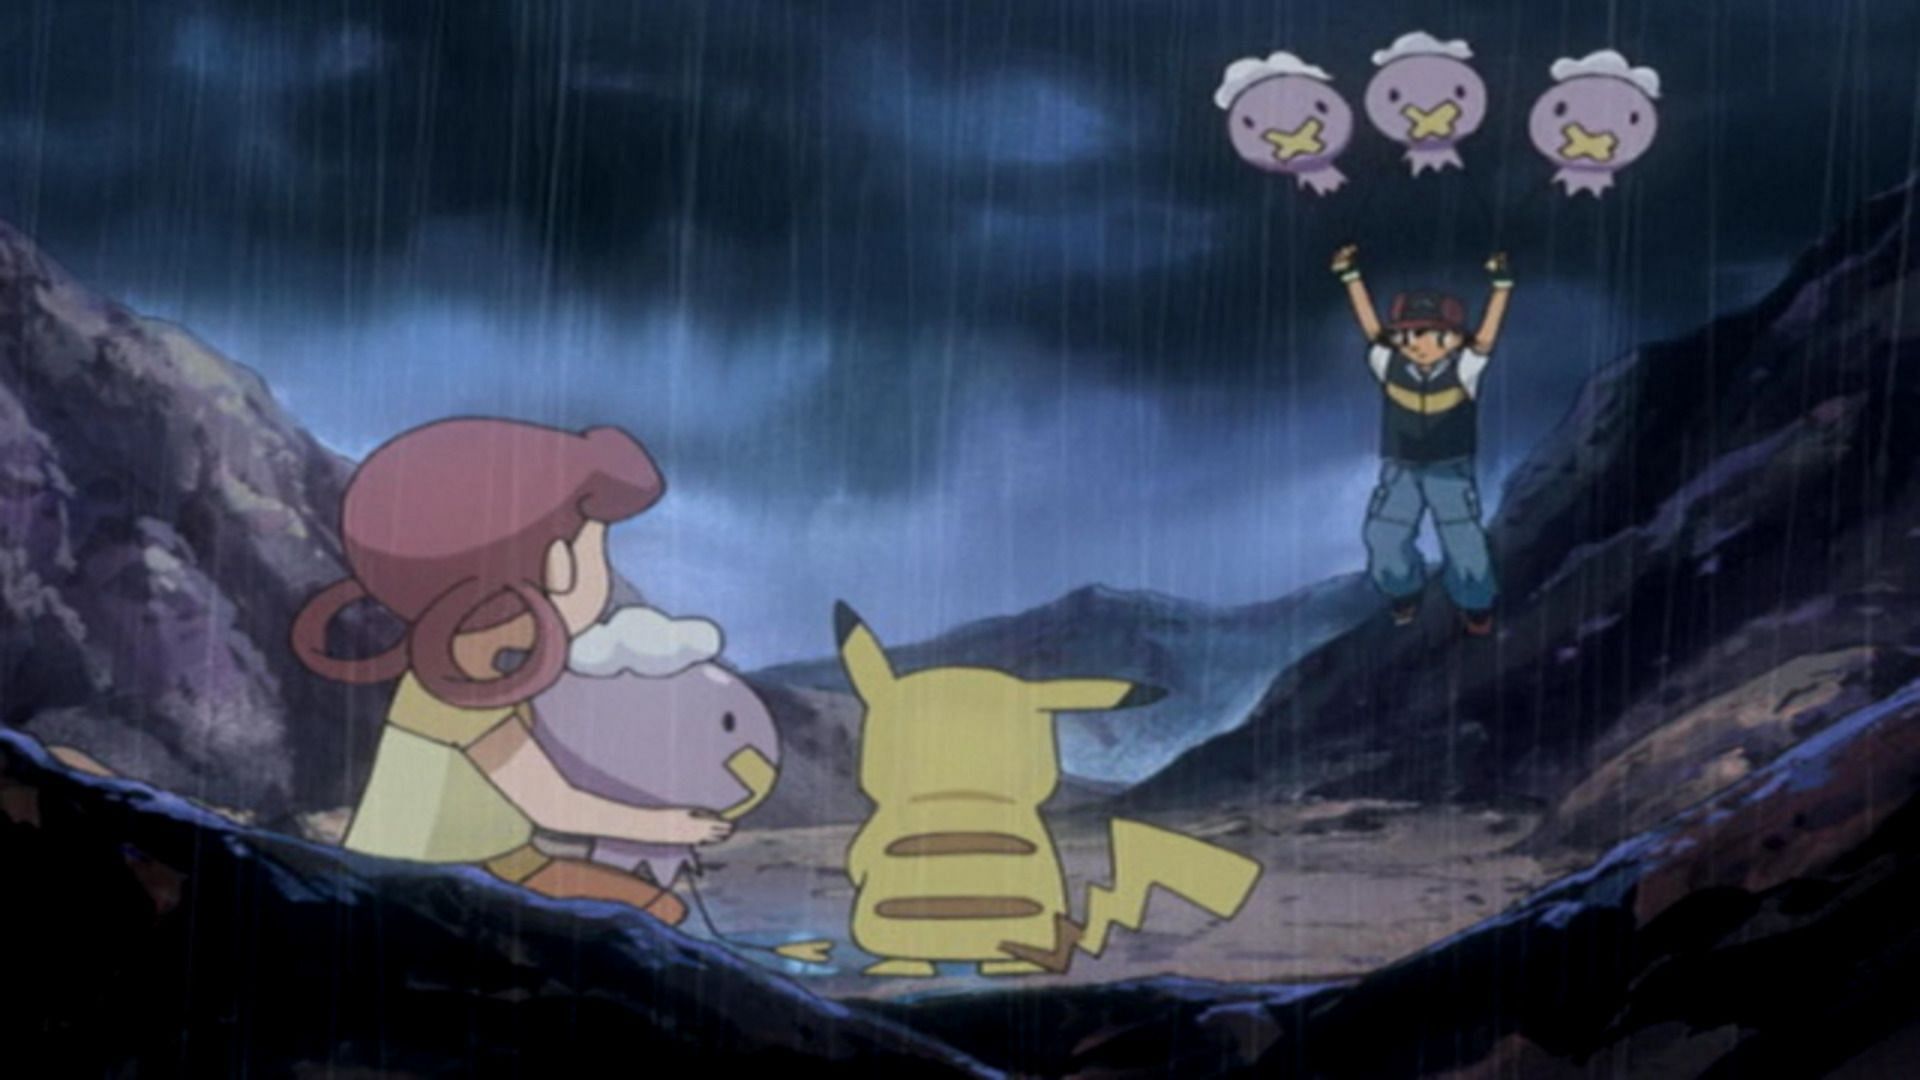 This episode ties the anime to an iconinc moment from the mainline Sinnoh games (Image via The Pokemon Company)